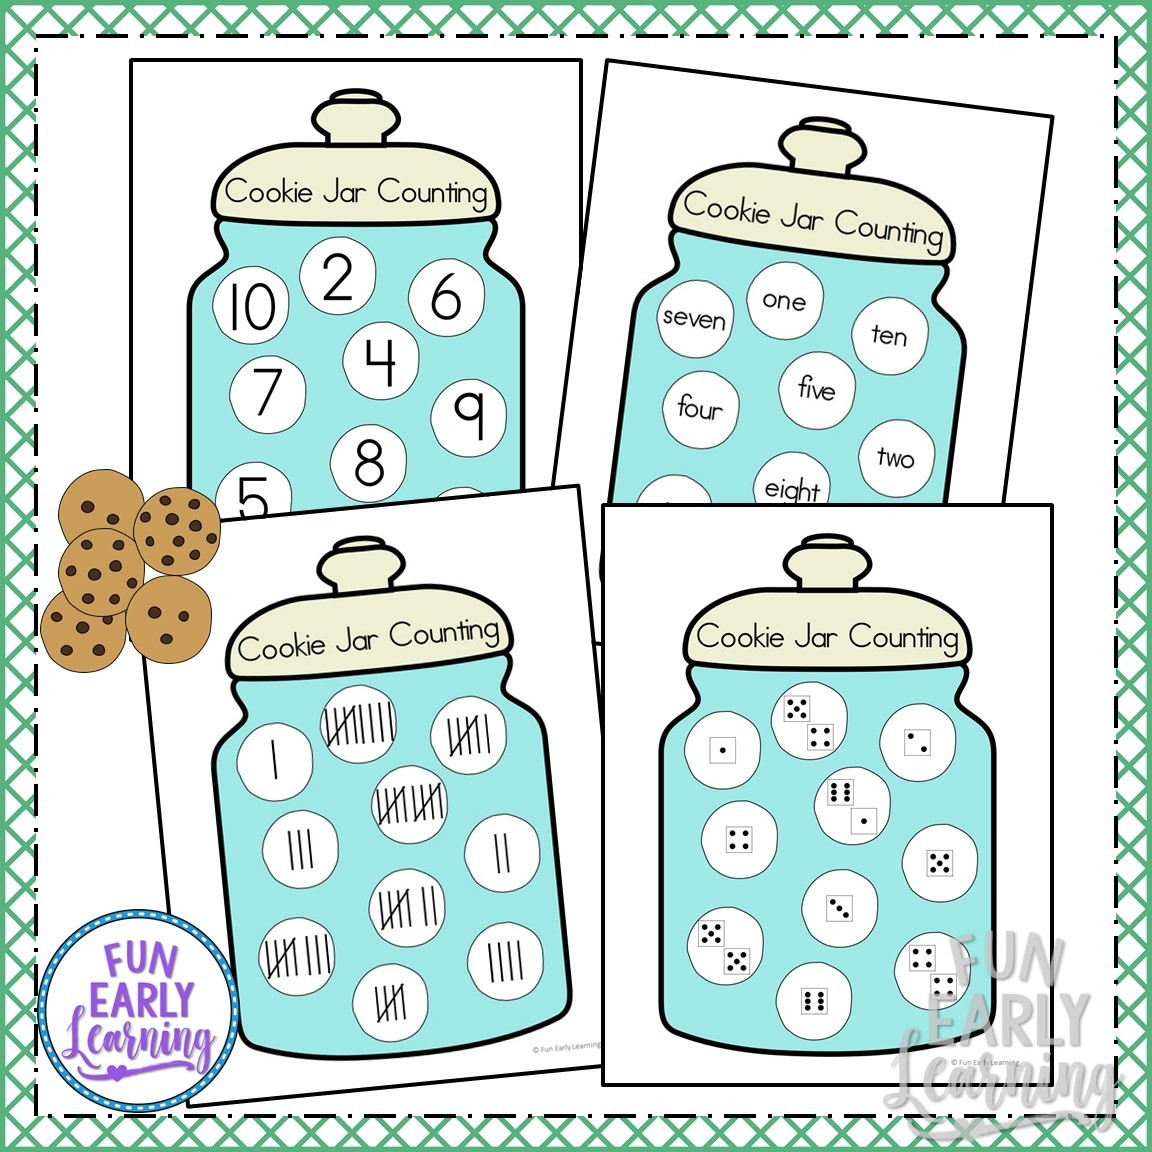 Cookie Jar Counting Fun Early Learning